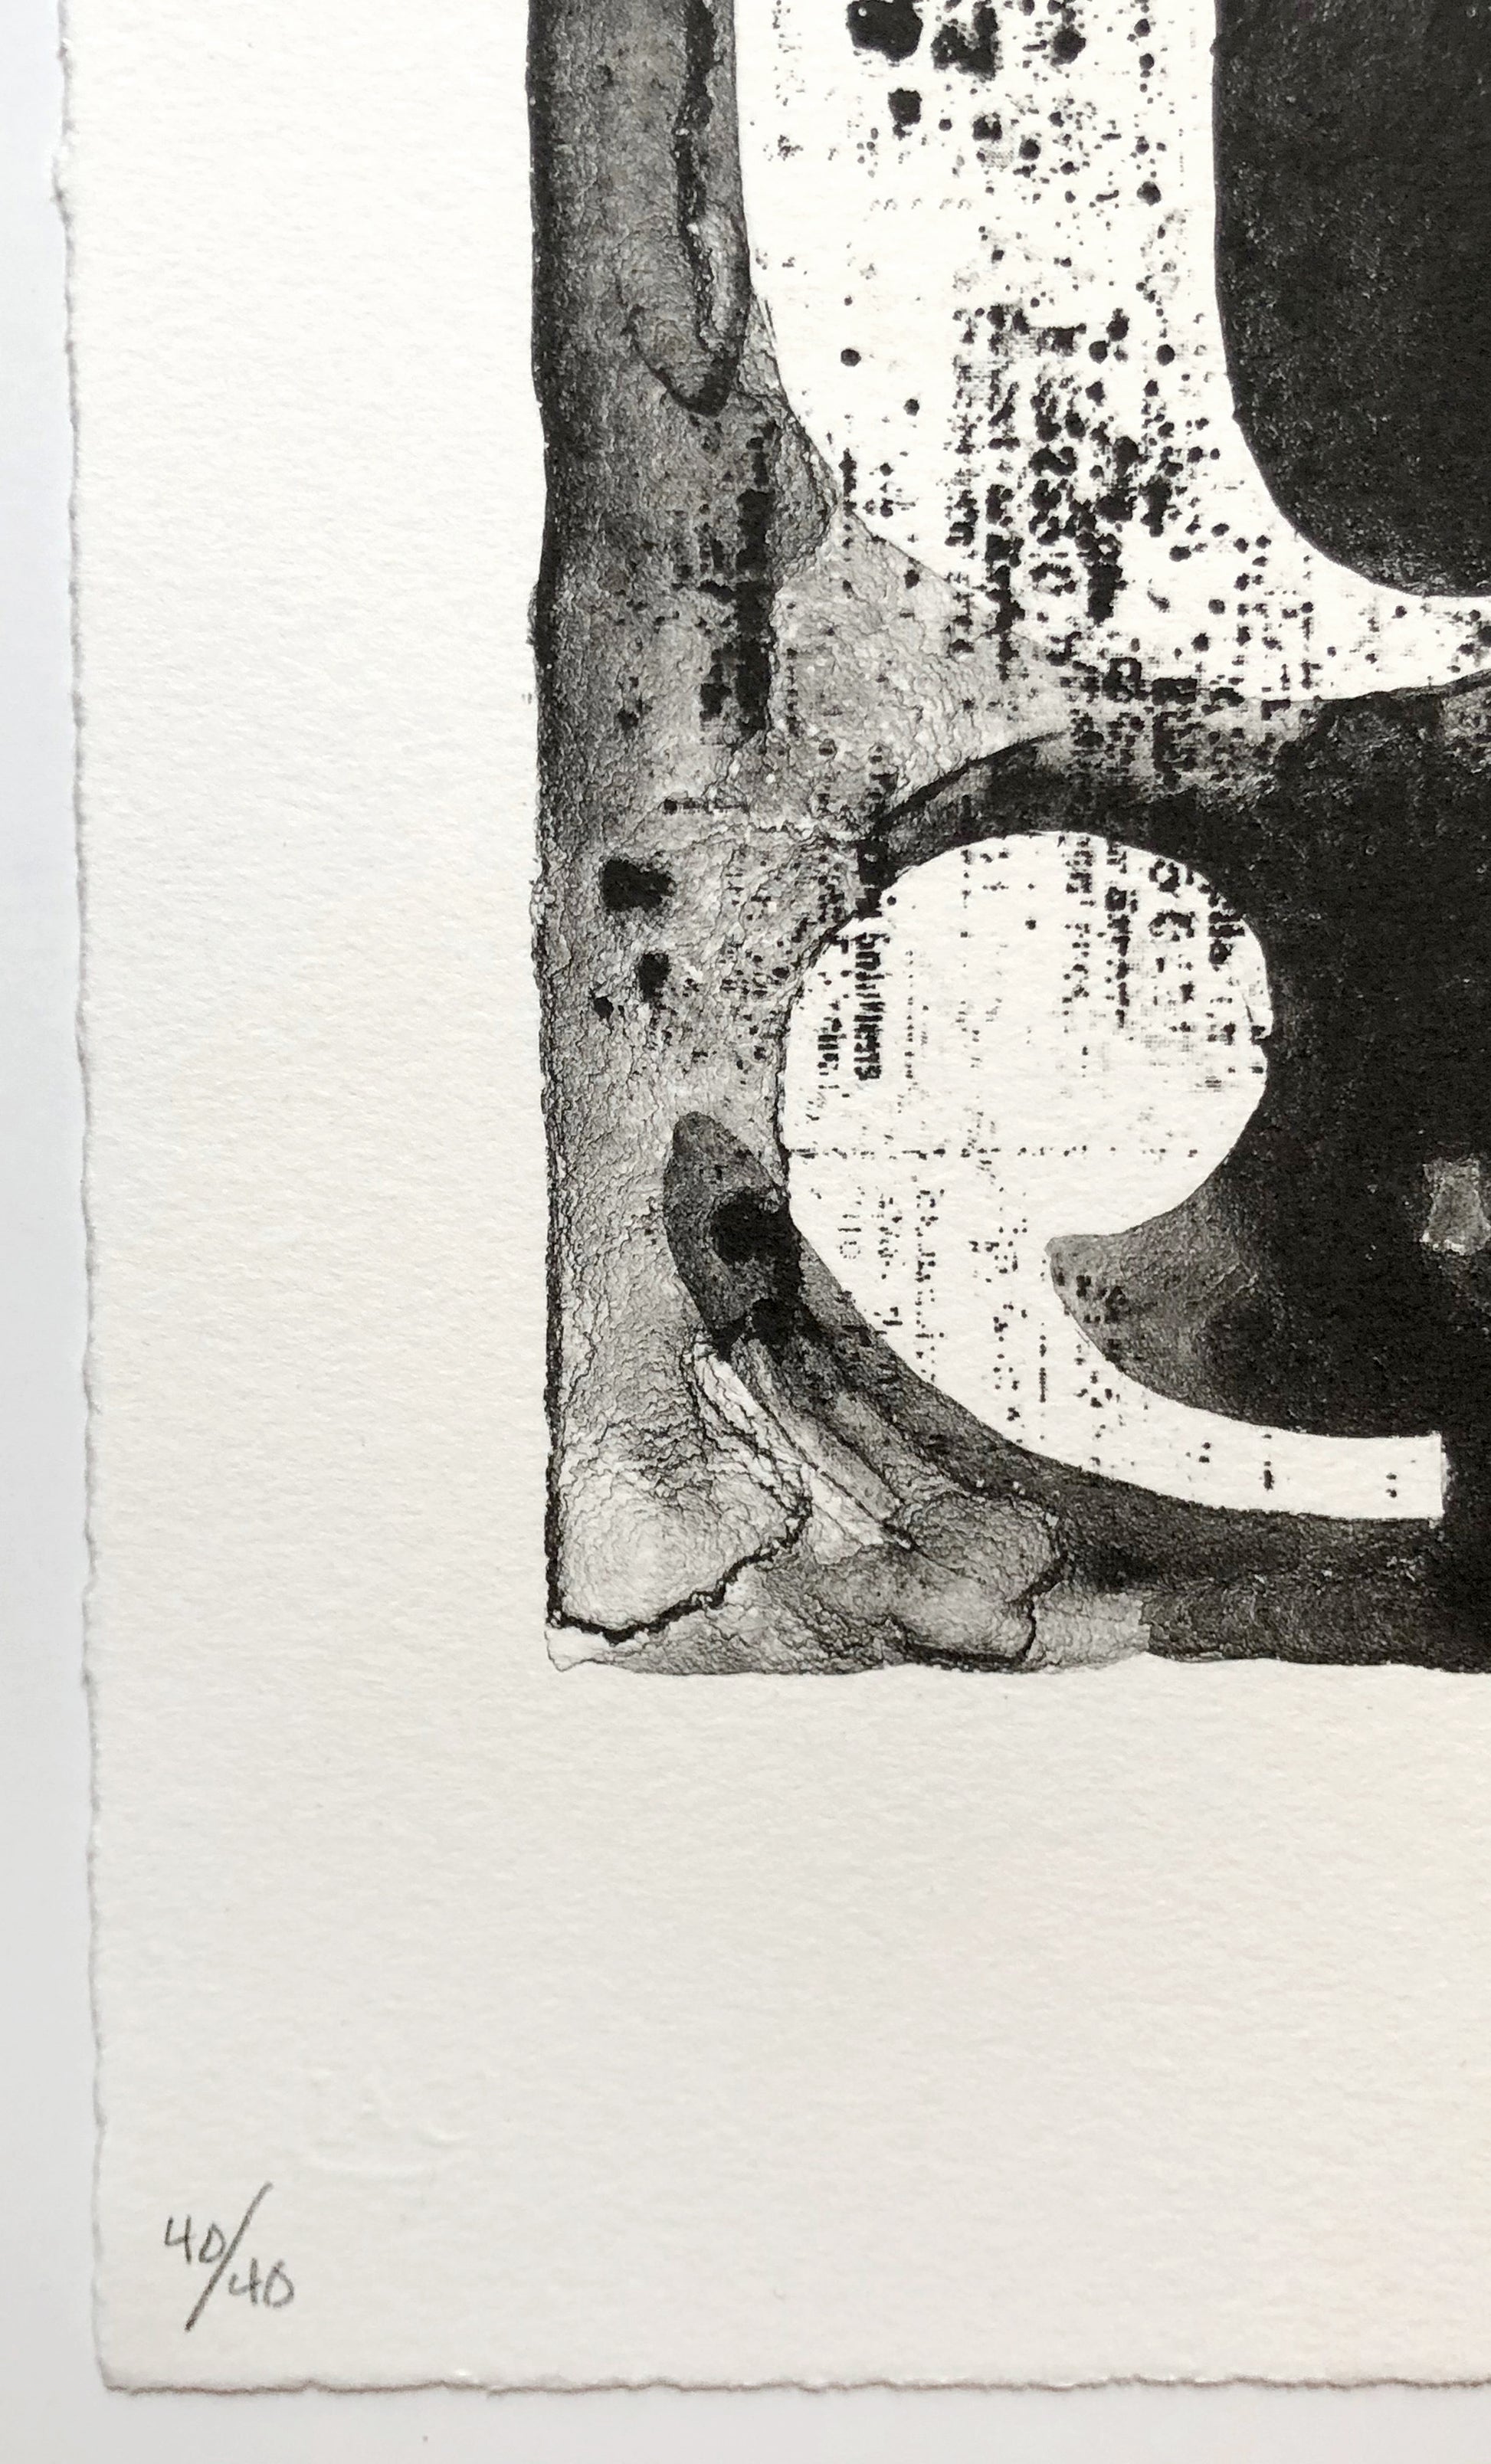 Detail Pencil Edition Number lower left Jasper Johns Figure 9 (from 0–9), 2012 Lithograph detail of edition number